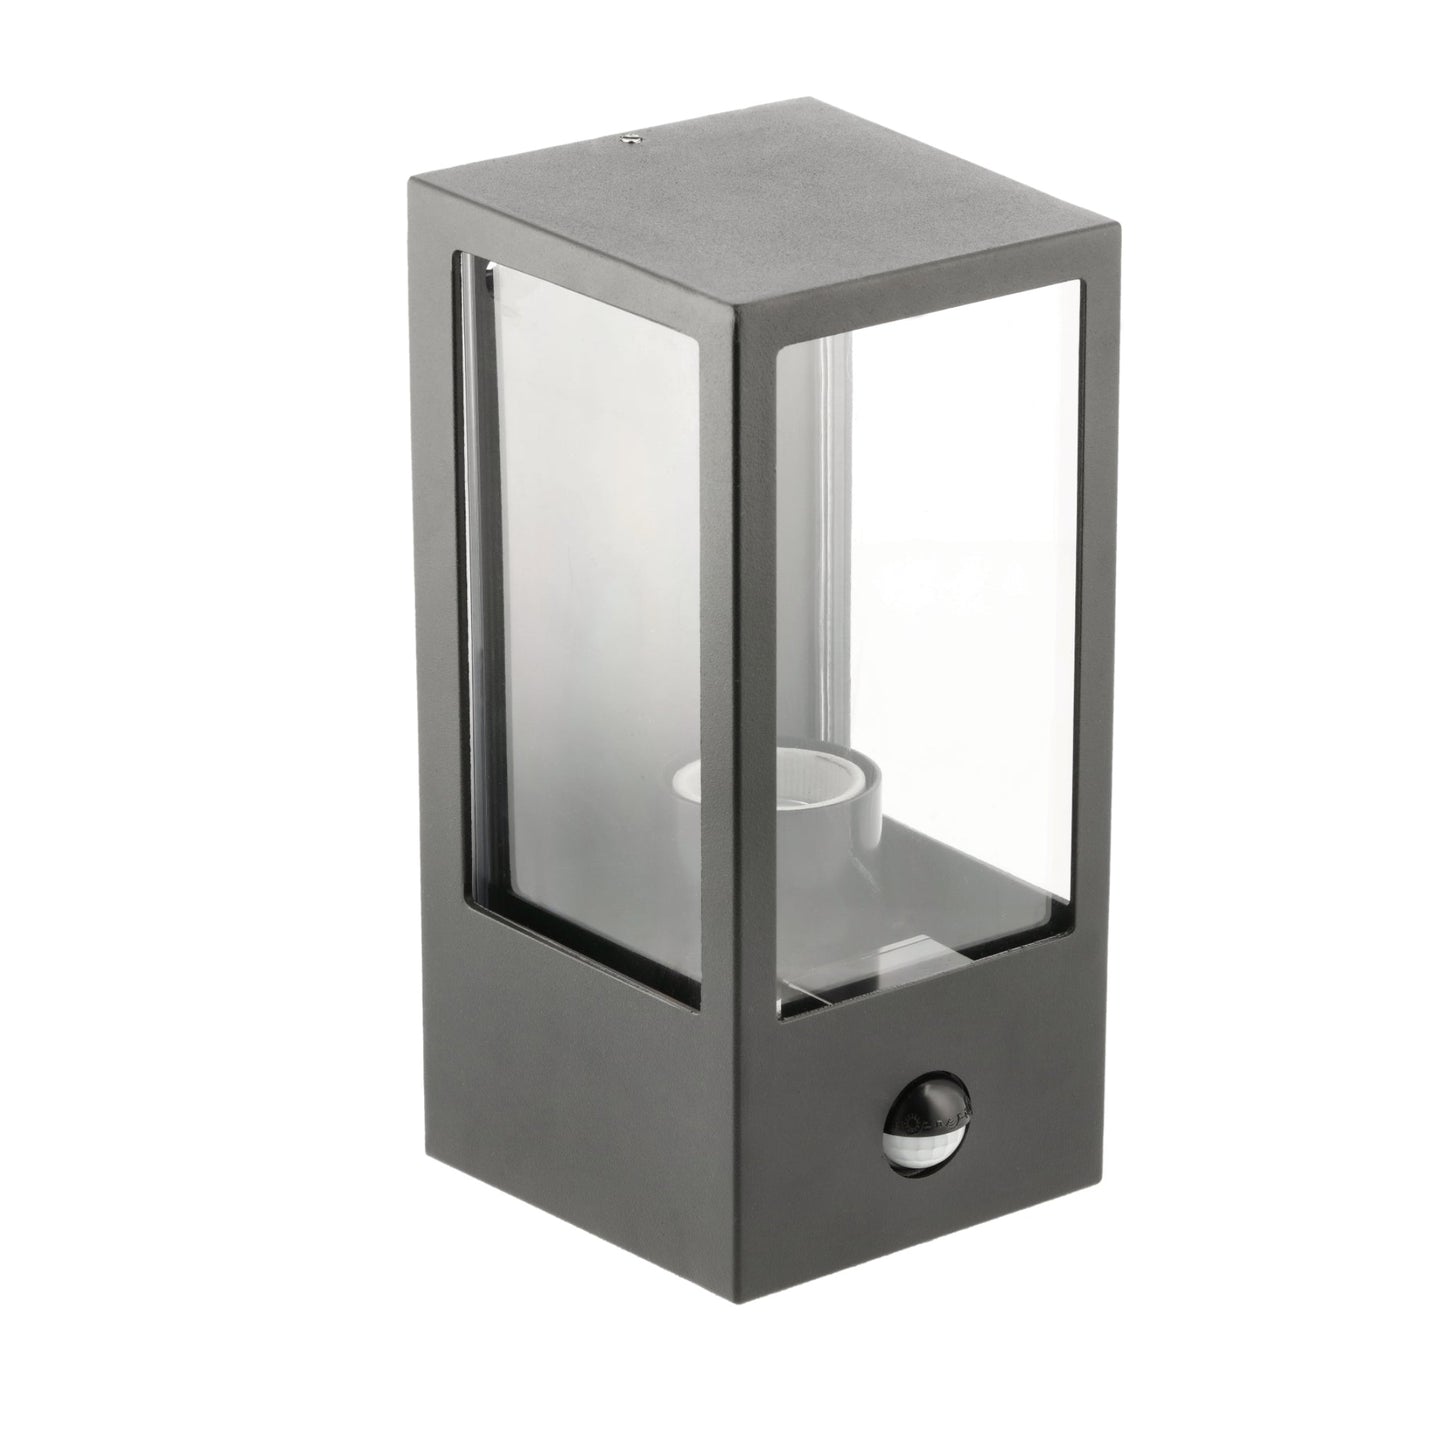 Our Marina black aluminium outdoor wall mounted lantern outdoor light with clear polycarbonate diffusers would look perfect in a modern or more traditional home design. Outside wall lights can provide atmospheric light in your garden, at the front door or on the terrace as well as a great security solution.